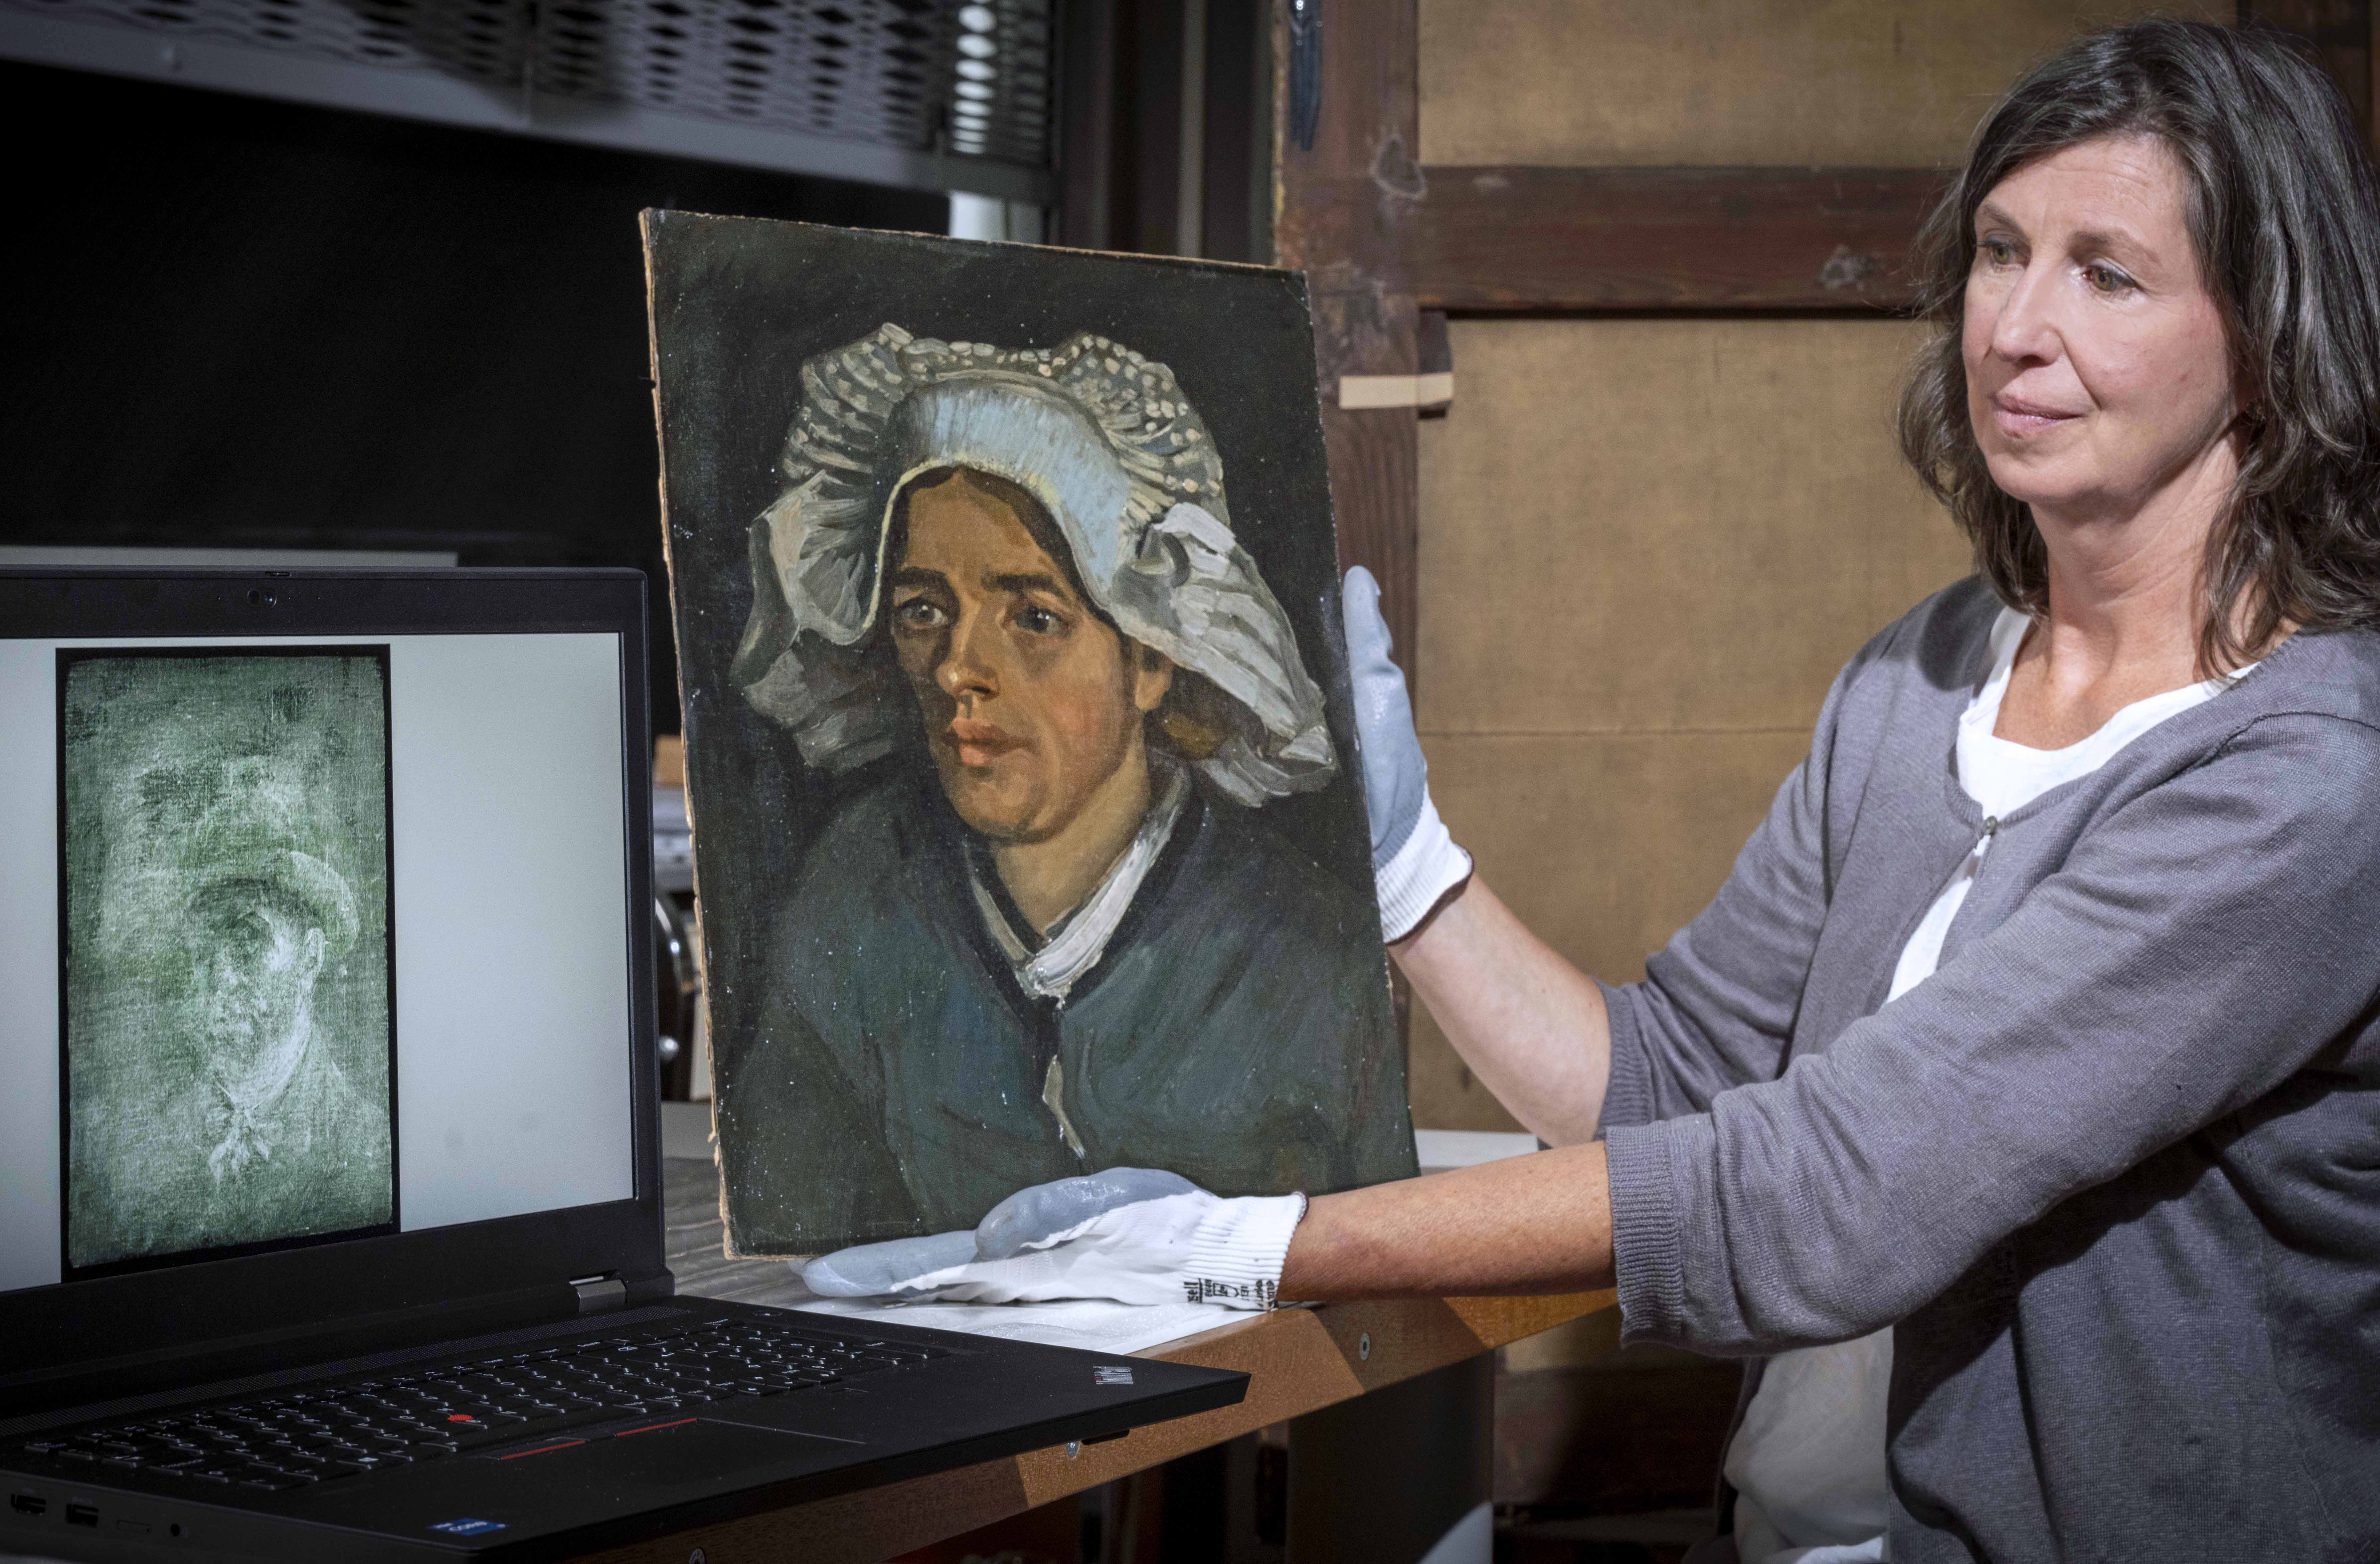 Senior Conservator Lesley Stevenson views ‘Head of a Peasant Woman’ alongside an X-ray image of the hidden Van Gogh self-portrait. Photograph by Neil Hanna. Courtesy of the National Galleries of Scotland